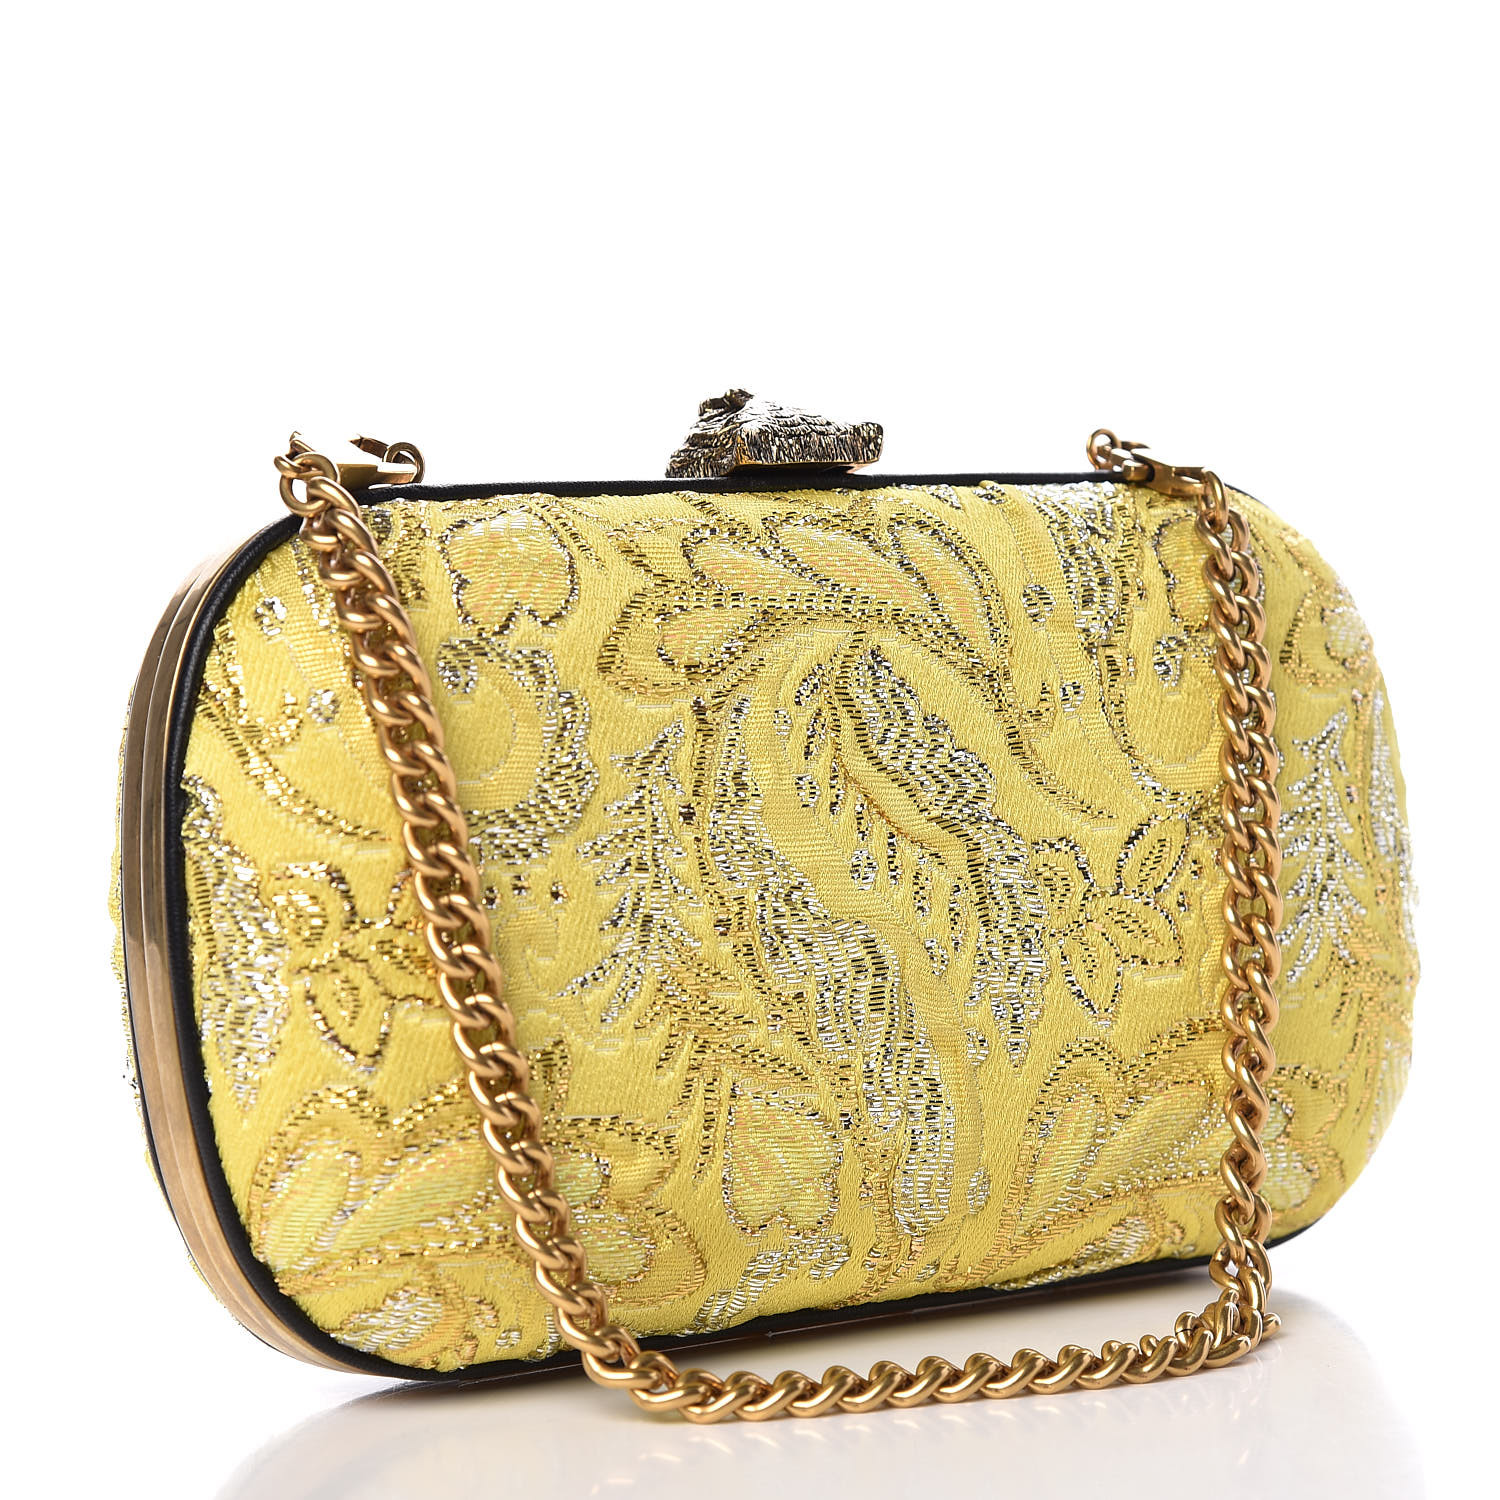 GUCCI Brocade Floral Broadway Clutch Yellow 435930